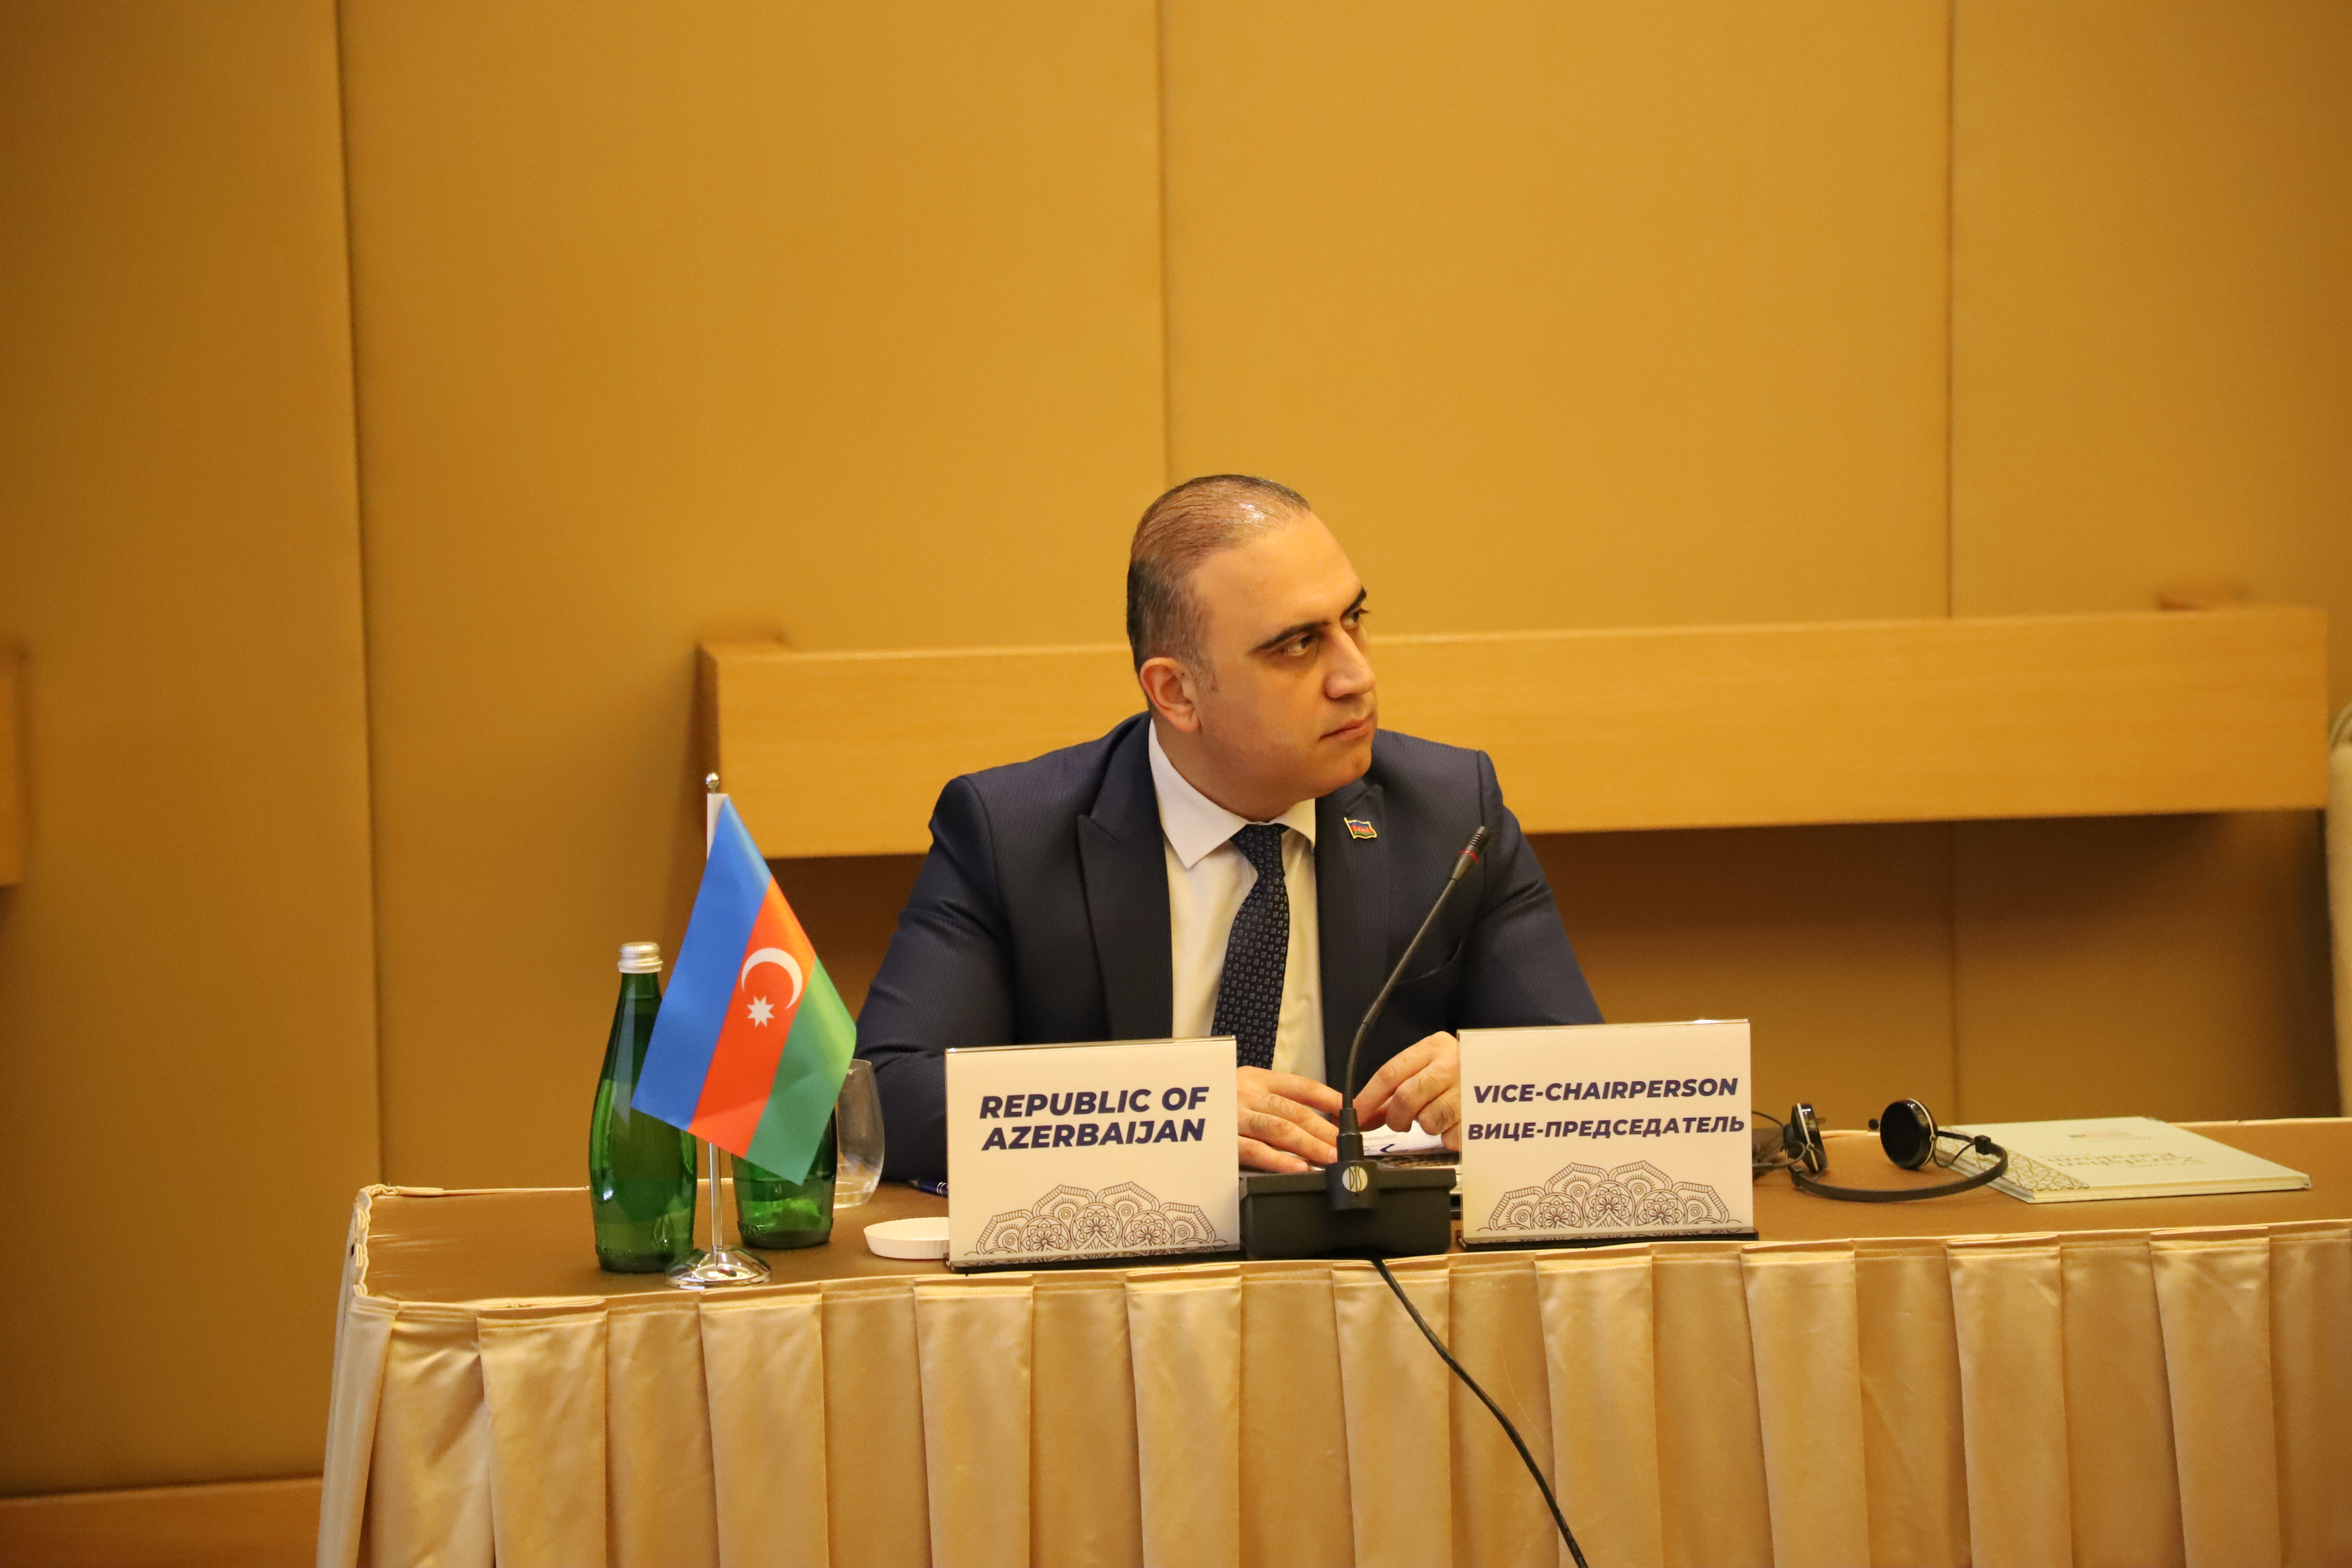 The 15th session of the General Assembly of International Institute for Central Asian Studies